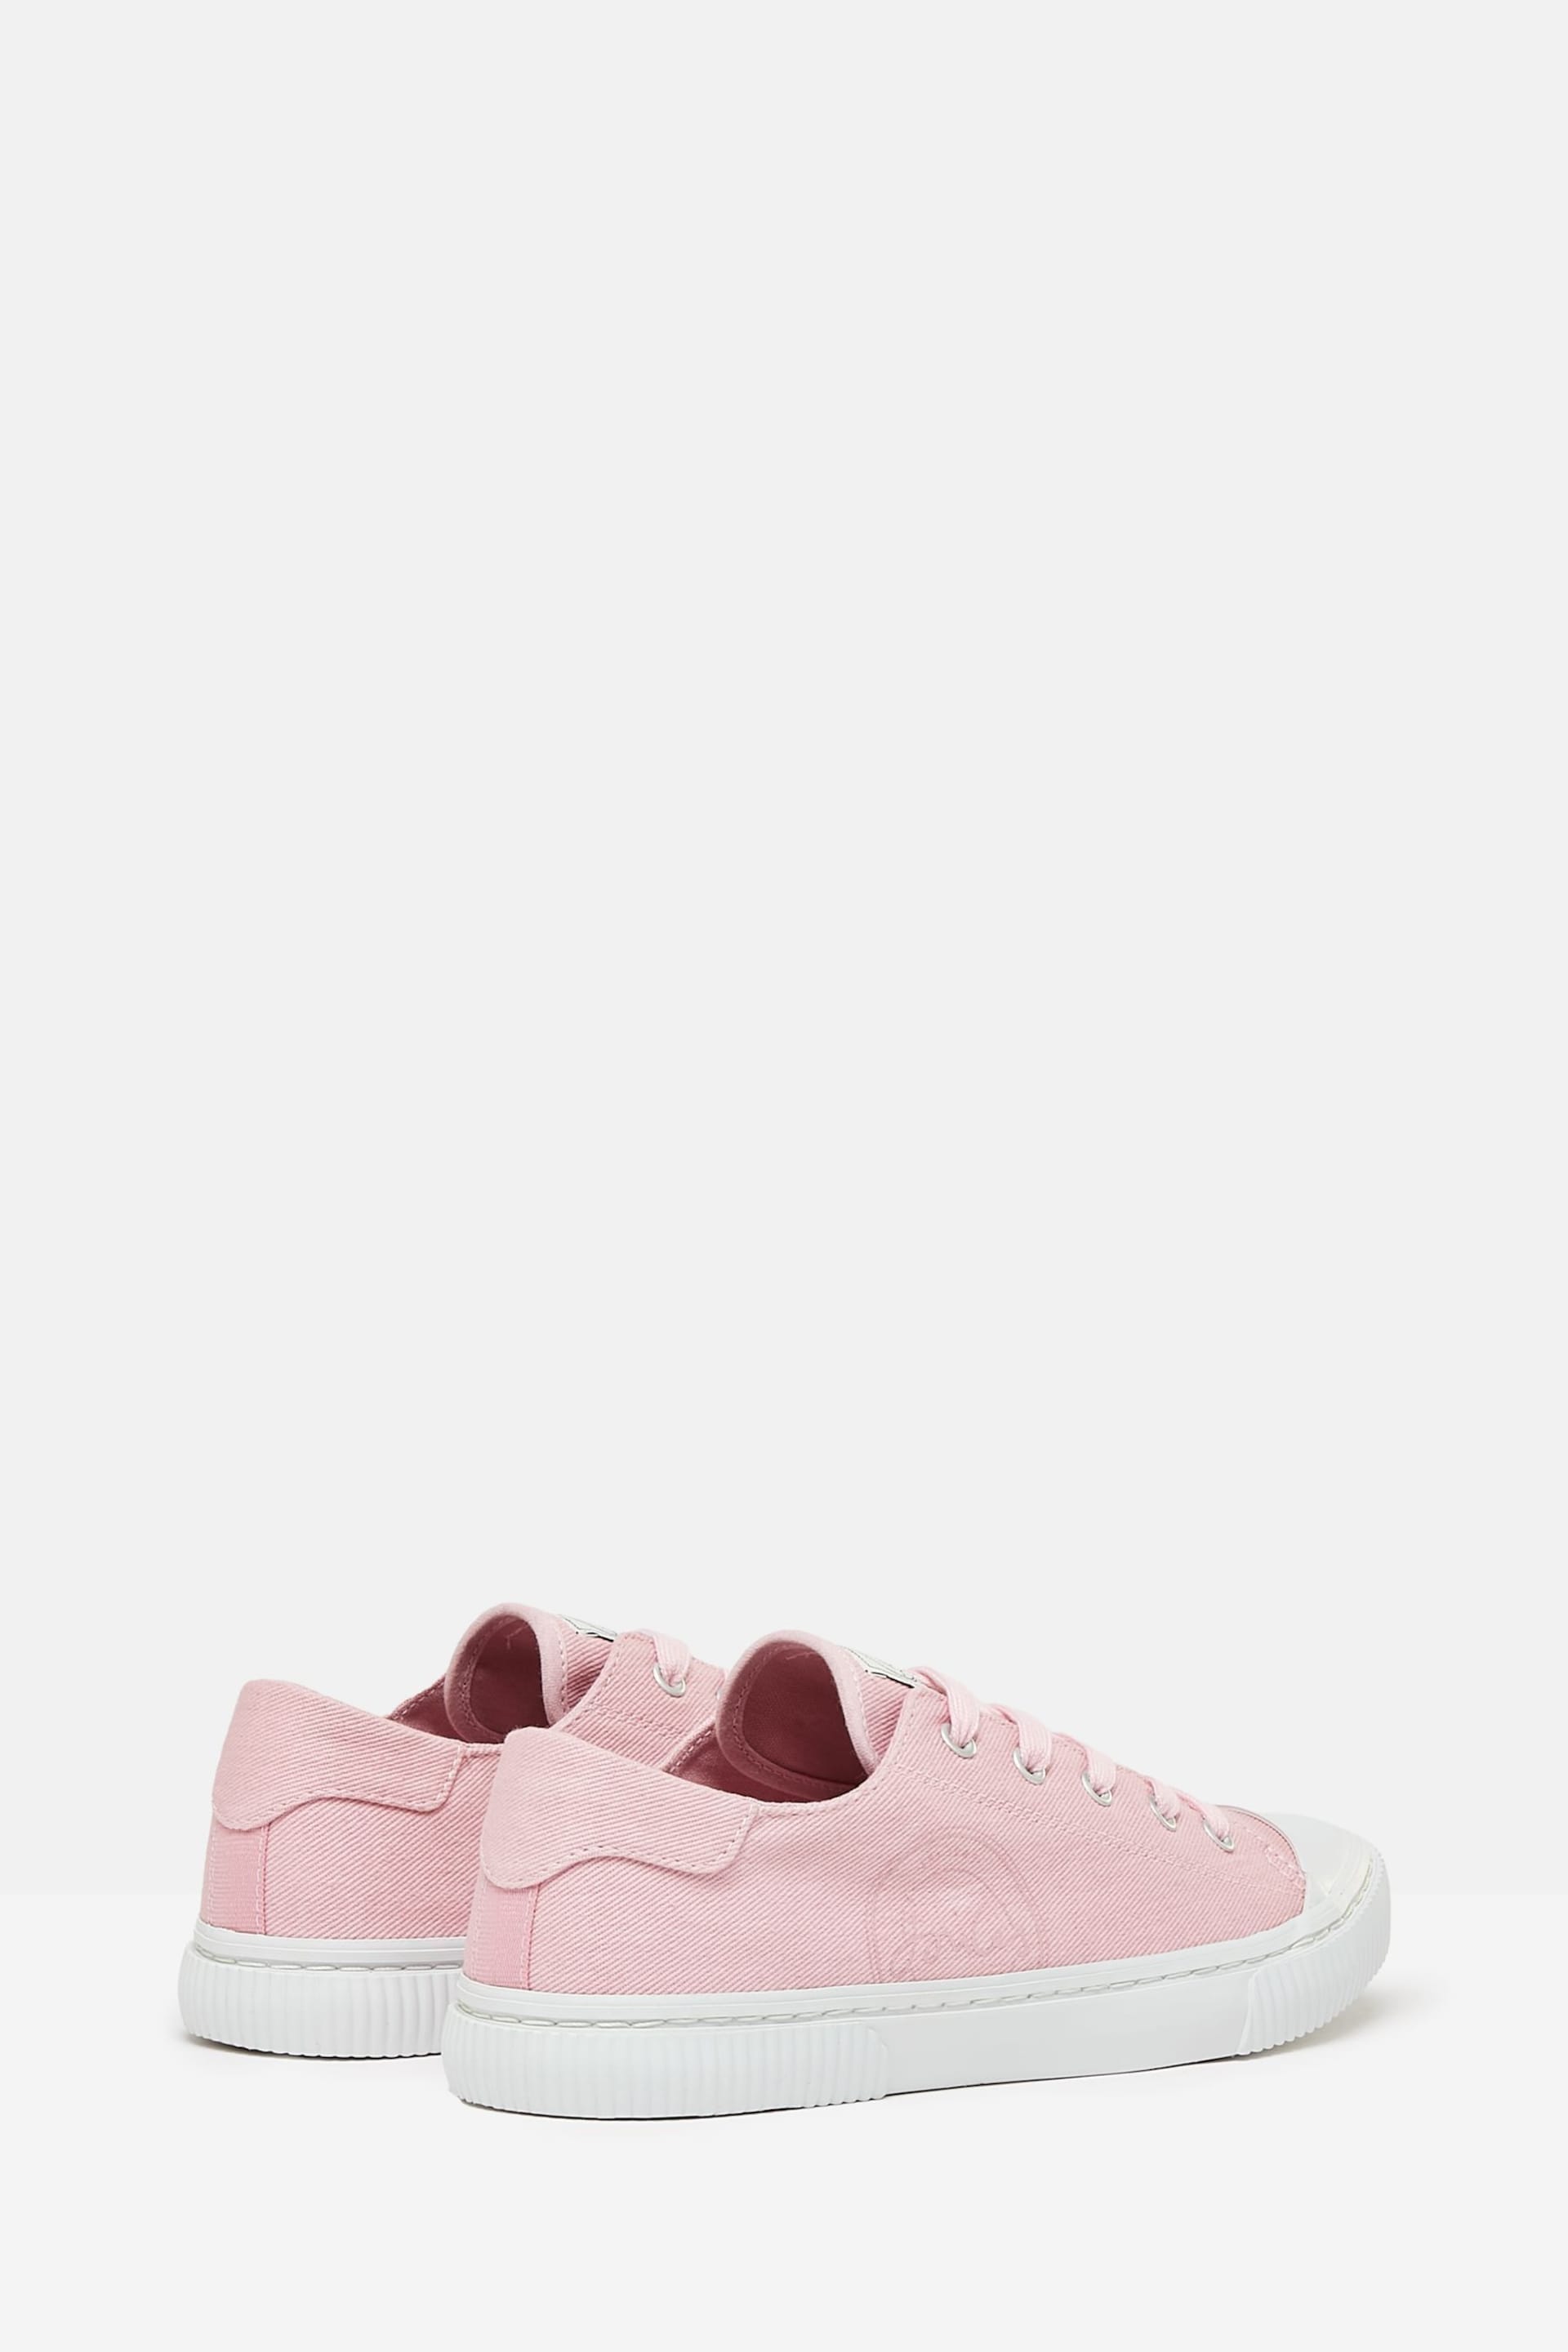 Joules Coast Pink Canvas Pumps - Image 2 of 7